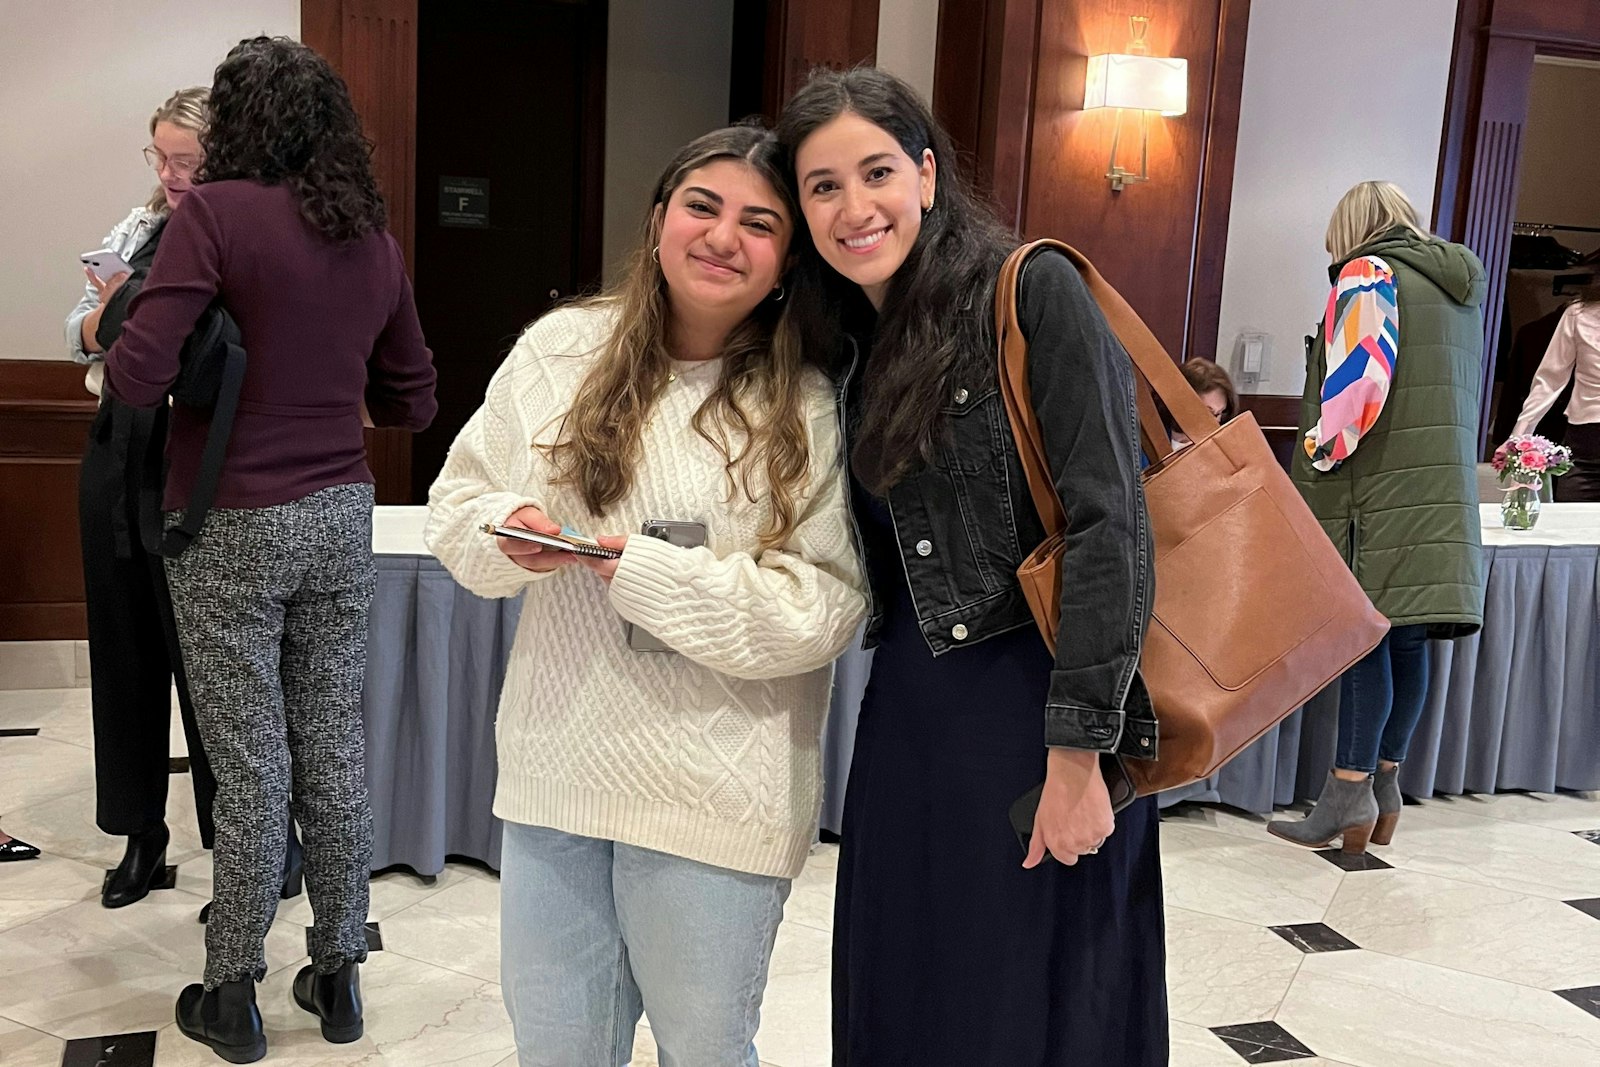 Manuella Simon brought her 16-year-old cousin Jenna Koumayah. Manuella has been to other “She Is … Made for More” events and wanted to bring her cousin to this event. “It’s nice to be with other Catholic women.”